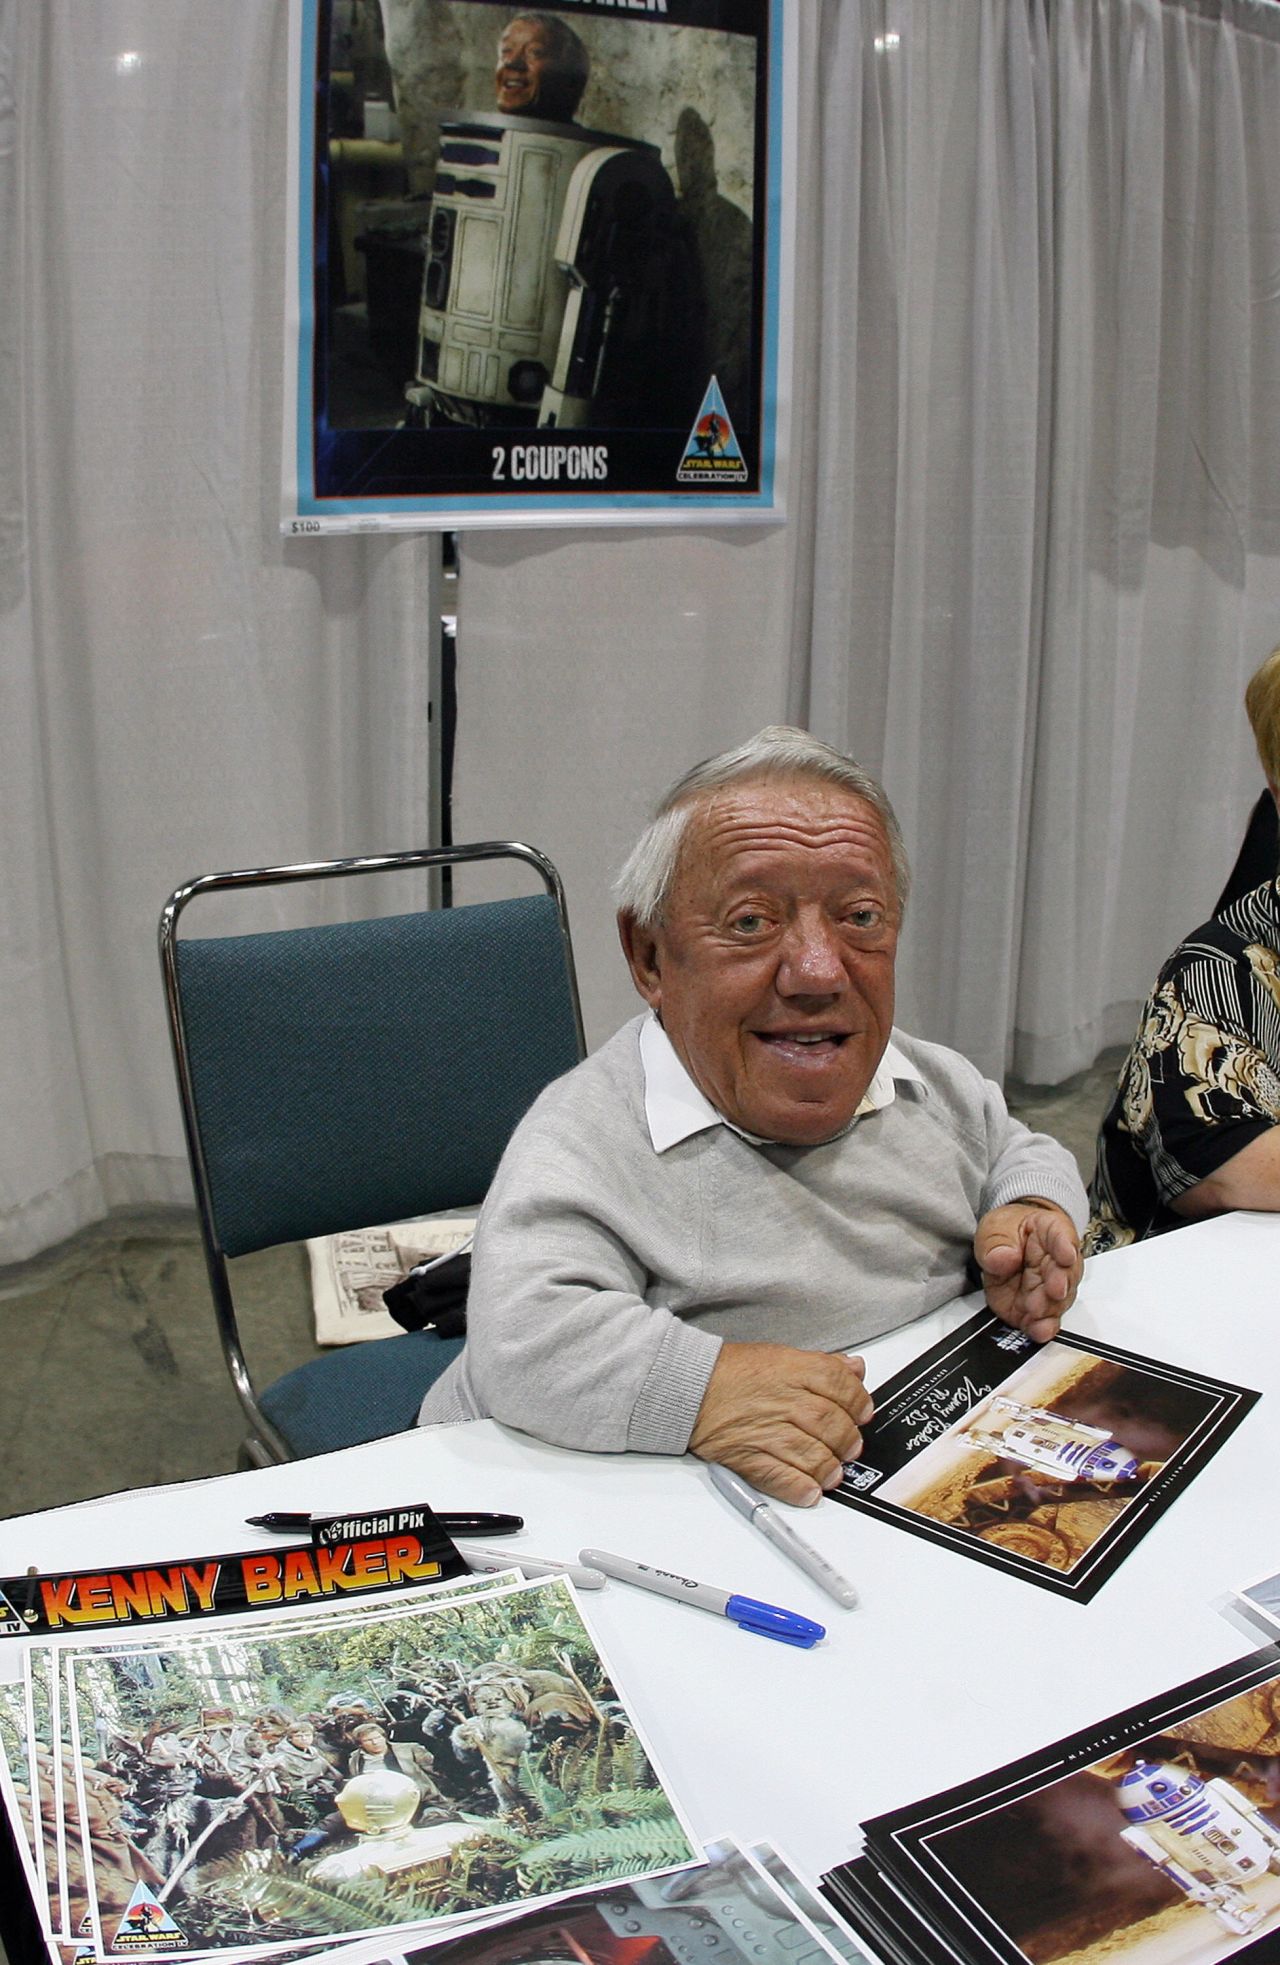 Like Daniels, Kenny Baker returned for the prequel trilogy to play R2-D2.